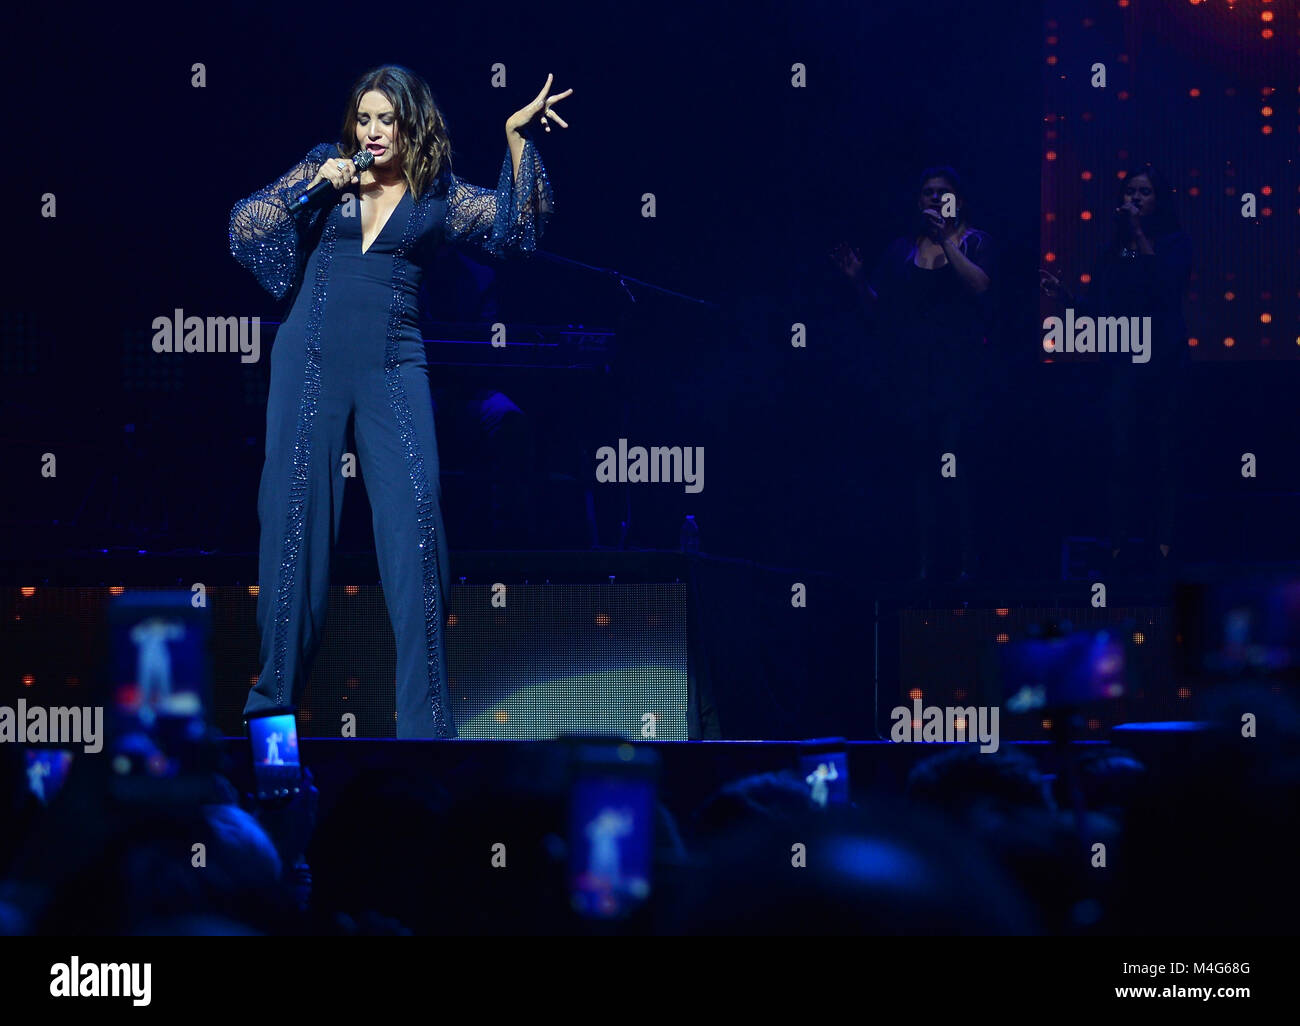 Miami, FL, USA. 15th Feb, 2018. Myriam Hernandez performs onstage during 'Amor en Concierto' Grandes Exitos at James L Knight Center on February 15, 2018 in Miami, Florida. Credit: Mpi10/Media Punch/Alamy Live News Stock Photo